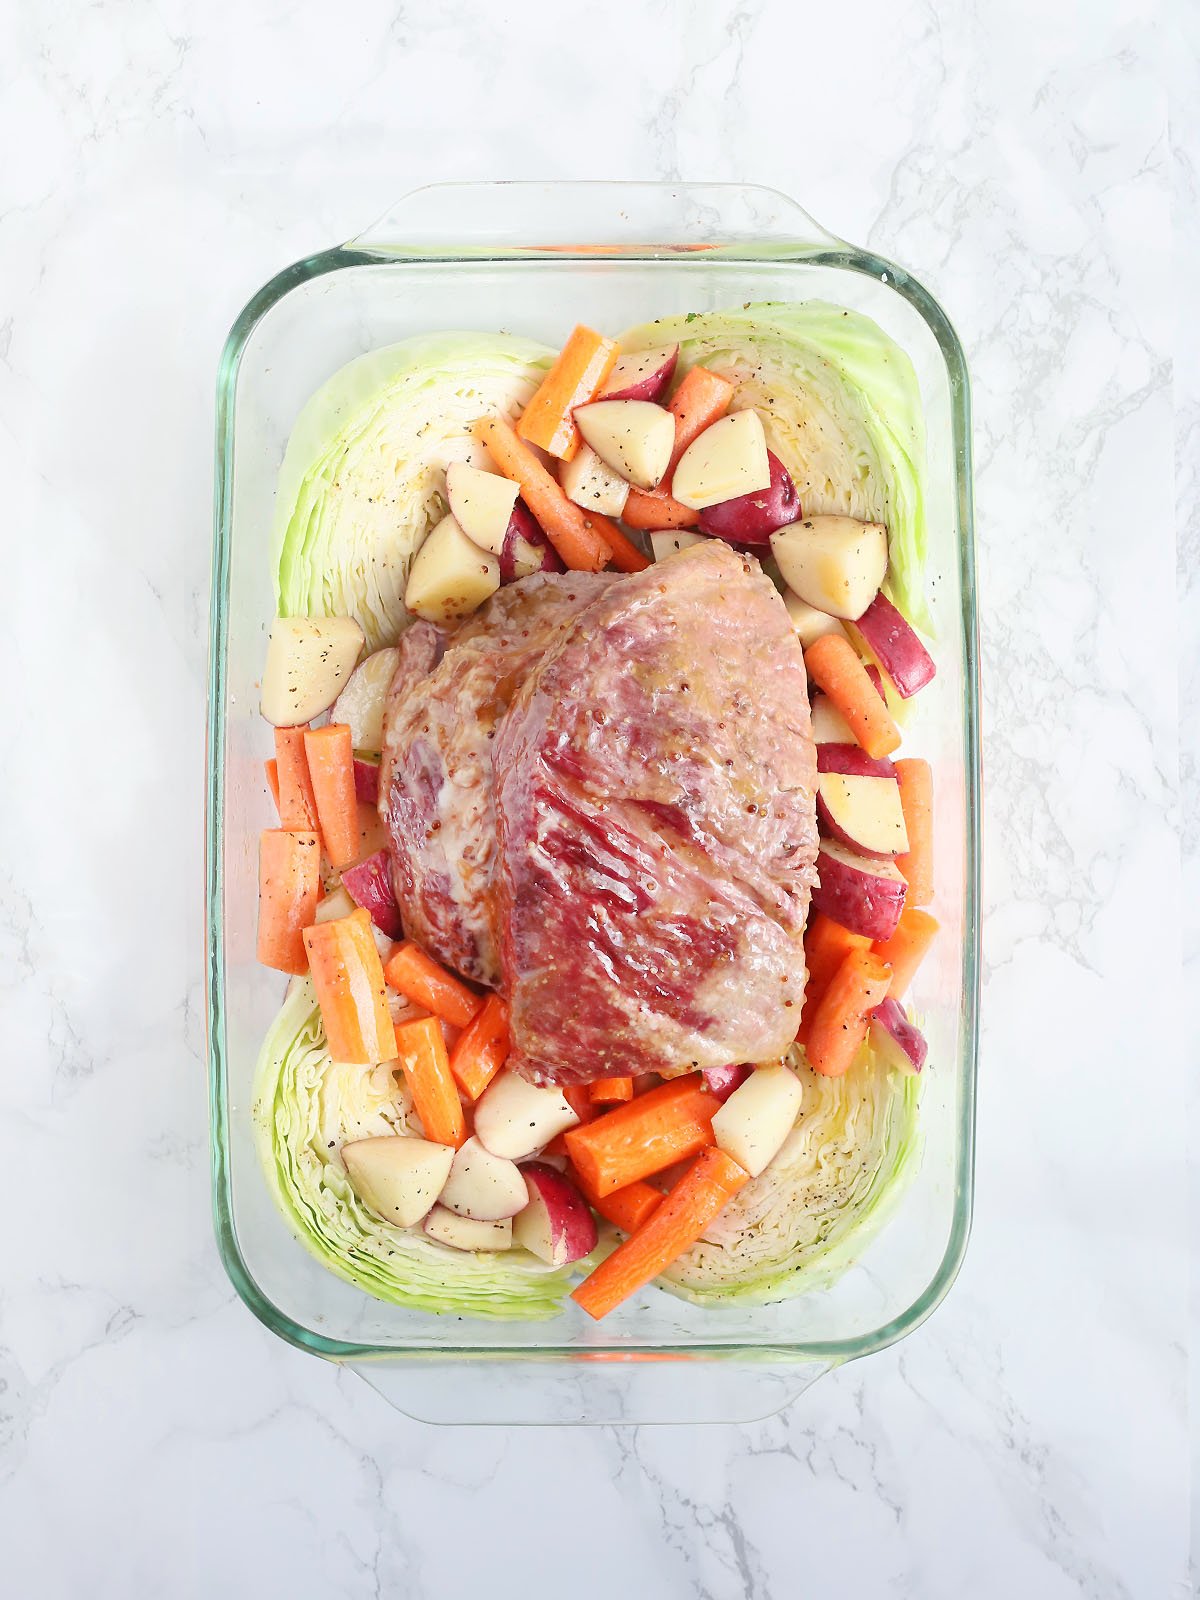 unbaked glazed corned beef brisket in a baking dish with cabbage, carrots and potatoes